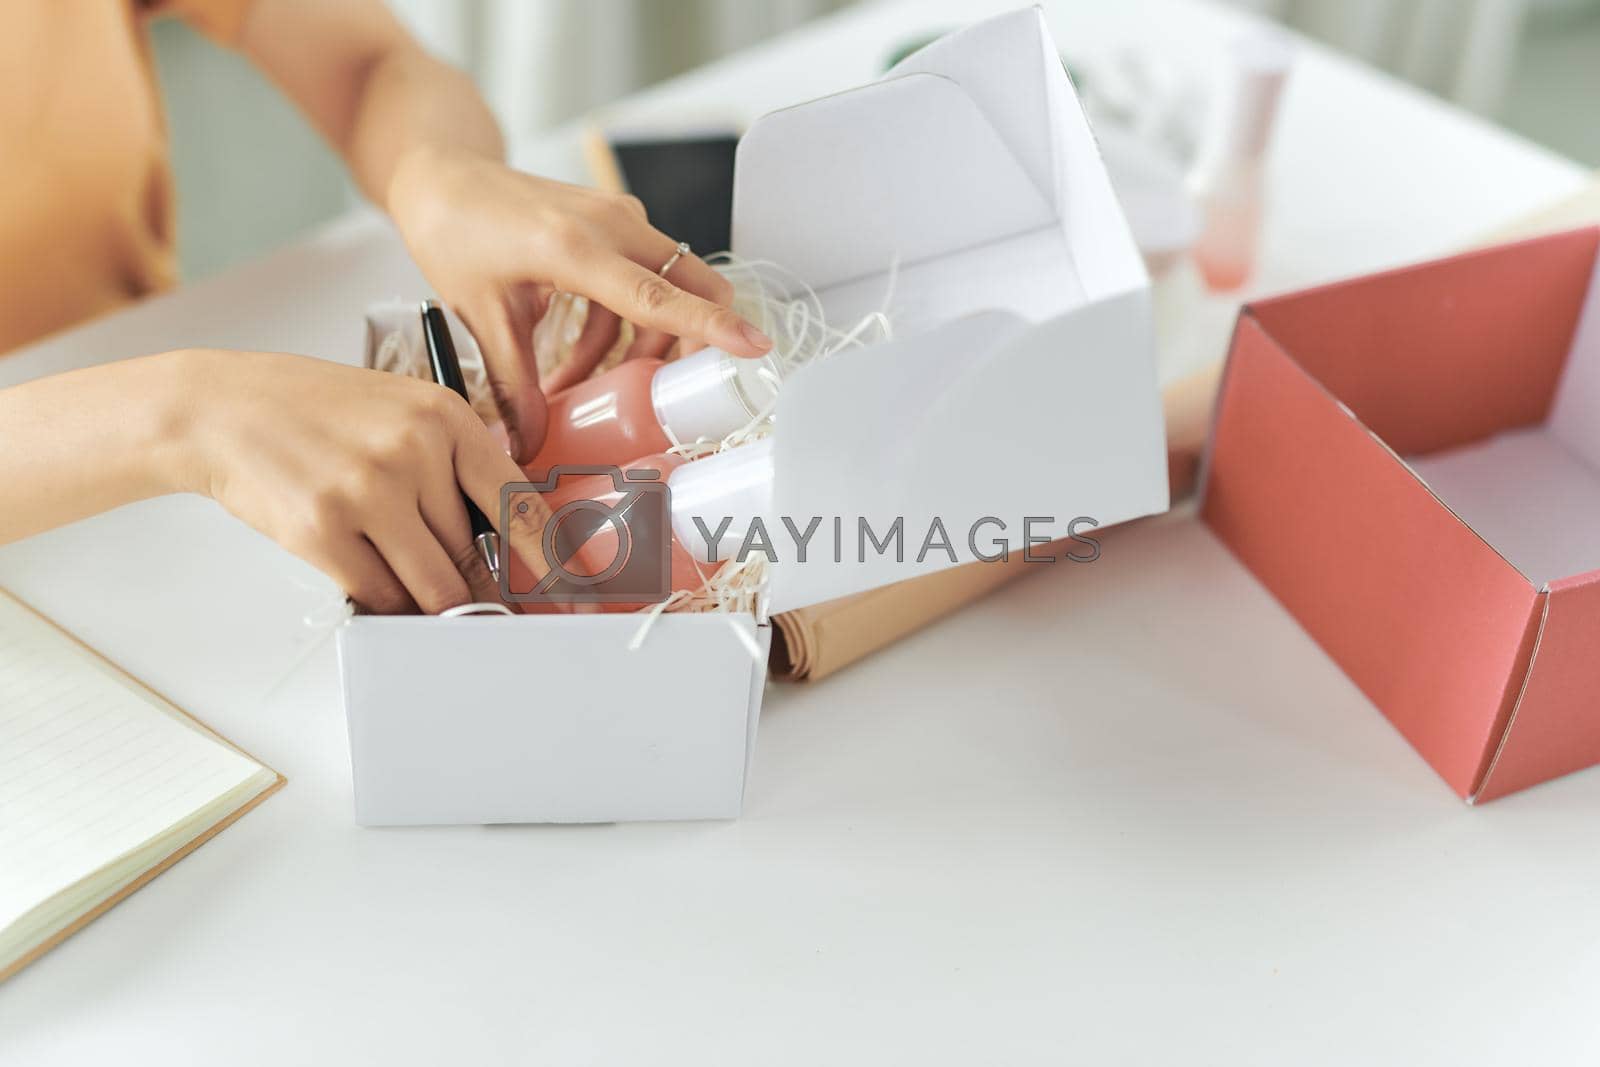 Royalty free image of Woman picking beauty box, package and collect the cosmetics product by makidotvn